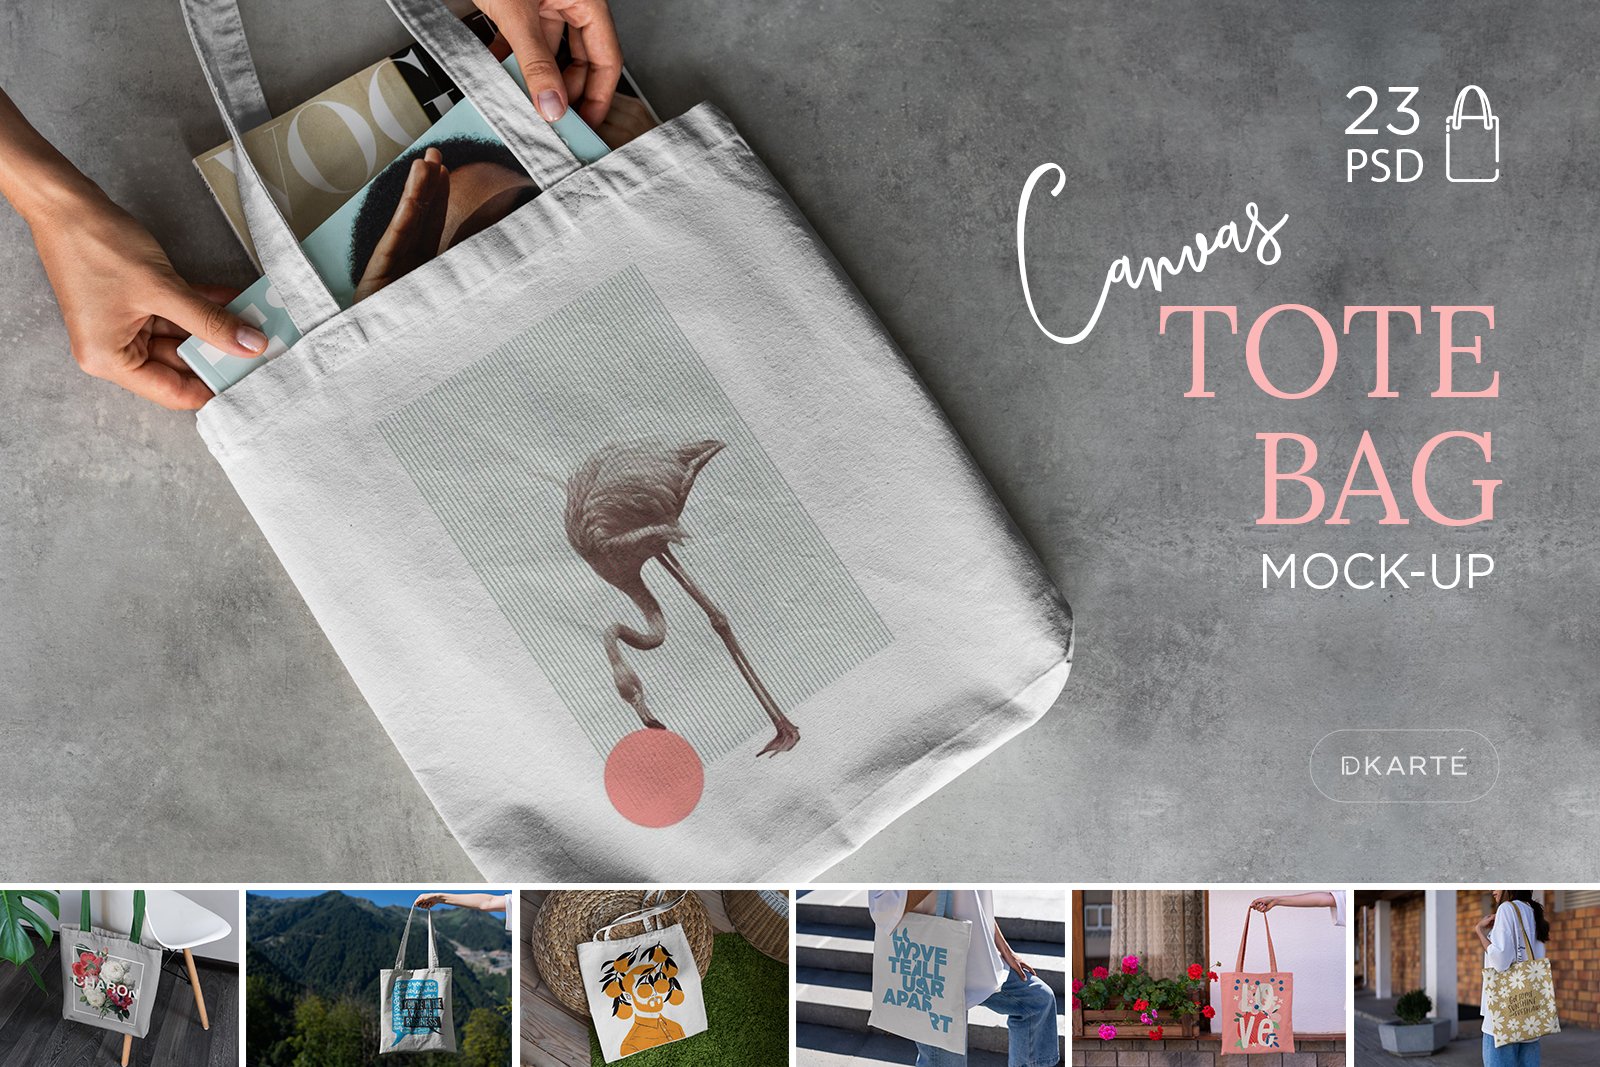 Canvas Tote Bag Mock-Up Lifestyle cover image.